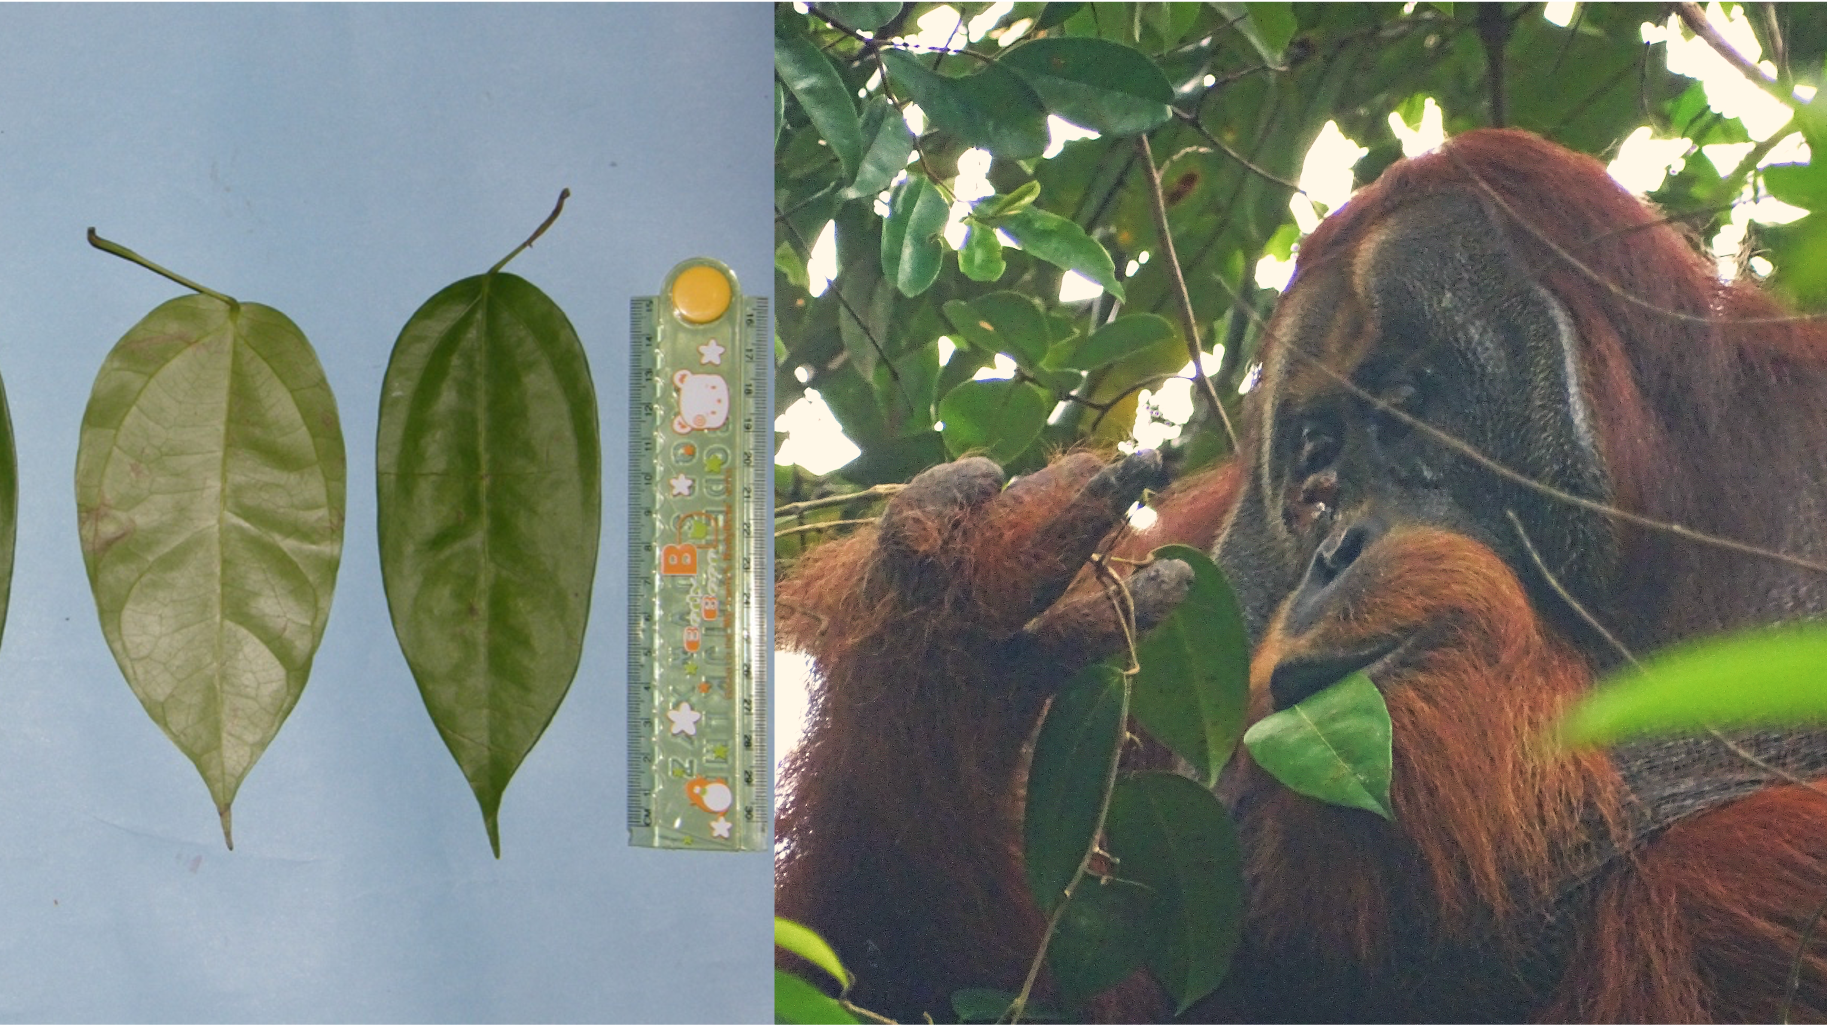 Pictures of Fibraurea tinctoria leaves, left. At right, Rakus is seen eating more of the leaves one day after applying a plant mesh to his wound.